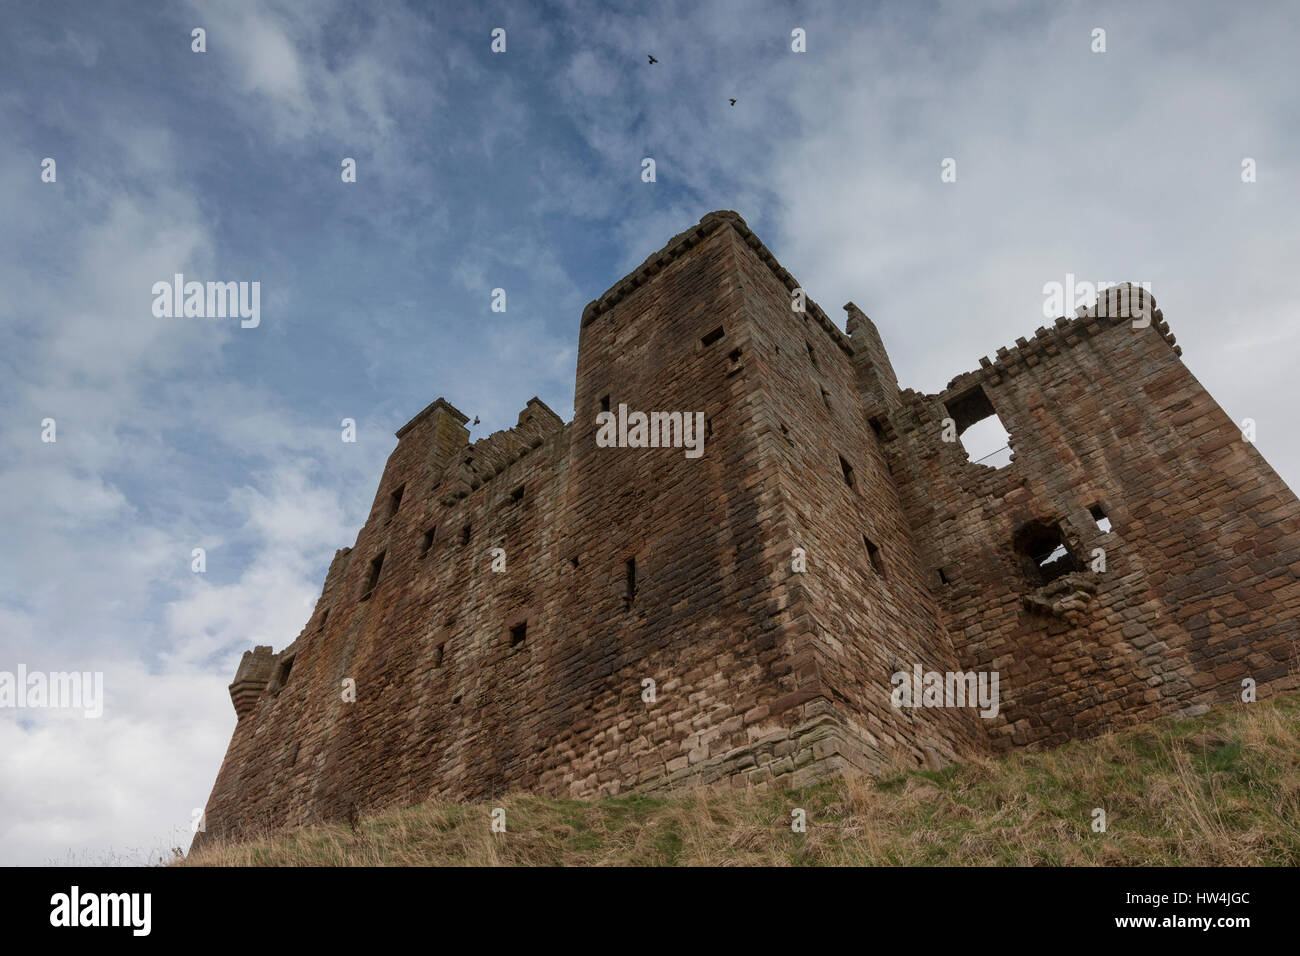 Crichton Castle, near Pathhead, Midlothian. The oldest part of the castle dates from the 15th century, and was later developed by the Crichton family. Stock Photo